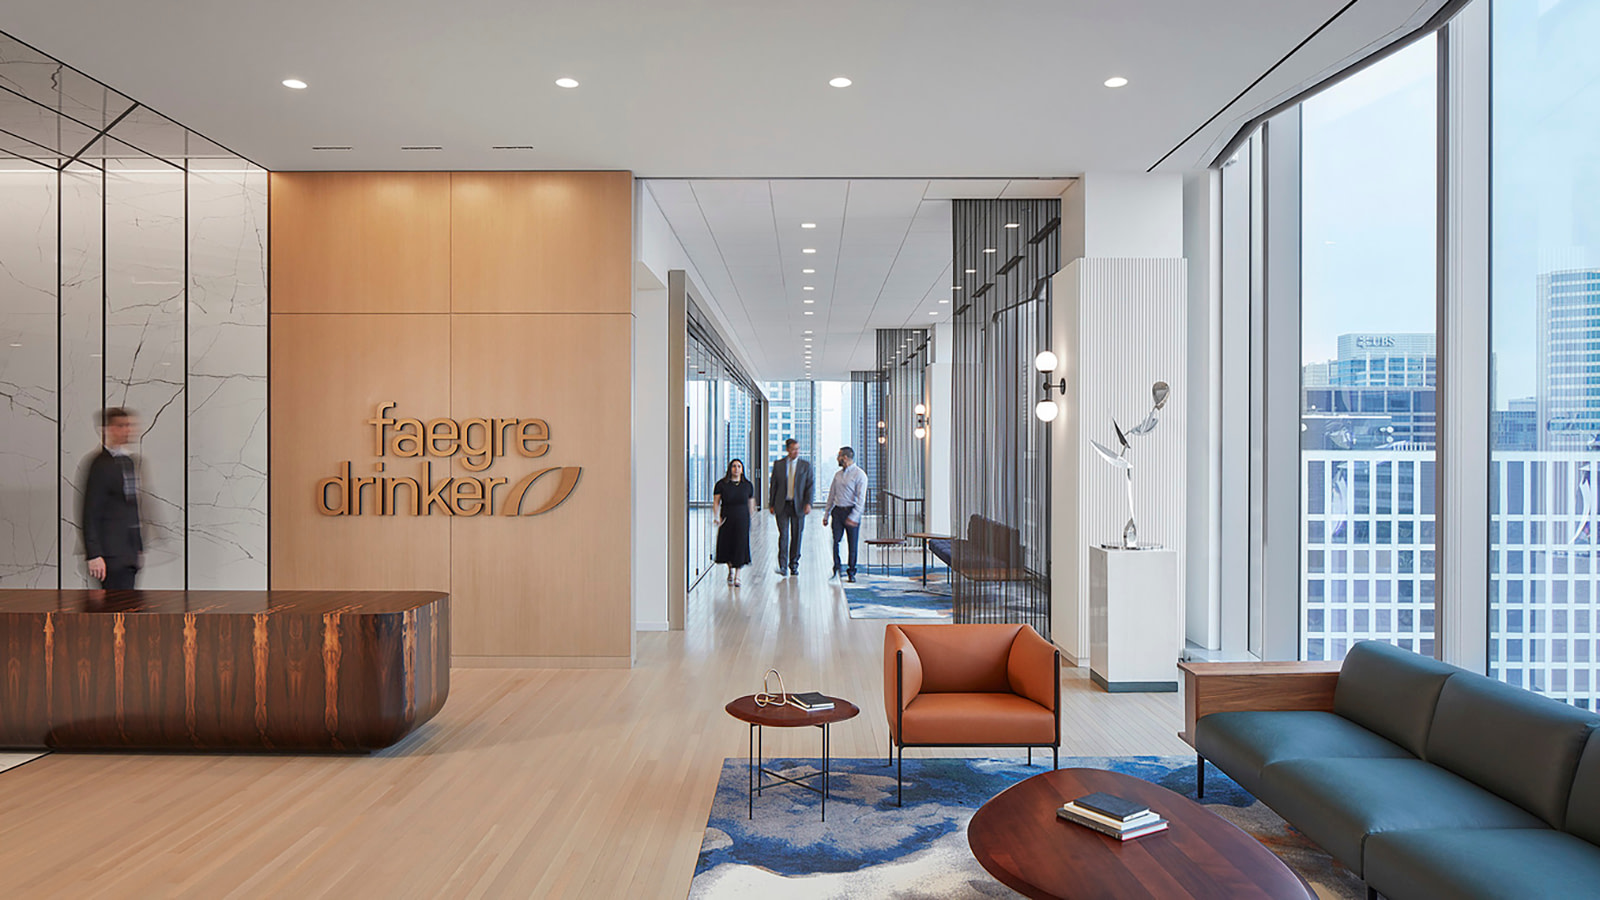 Reception area at Faegre Drinker's Chicago offices